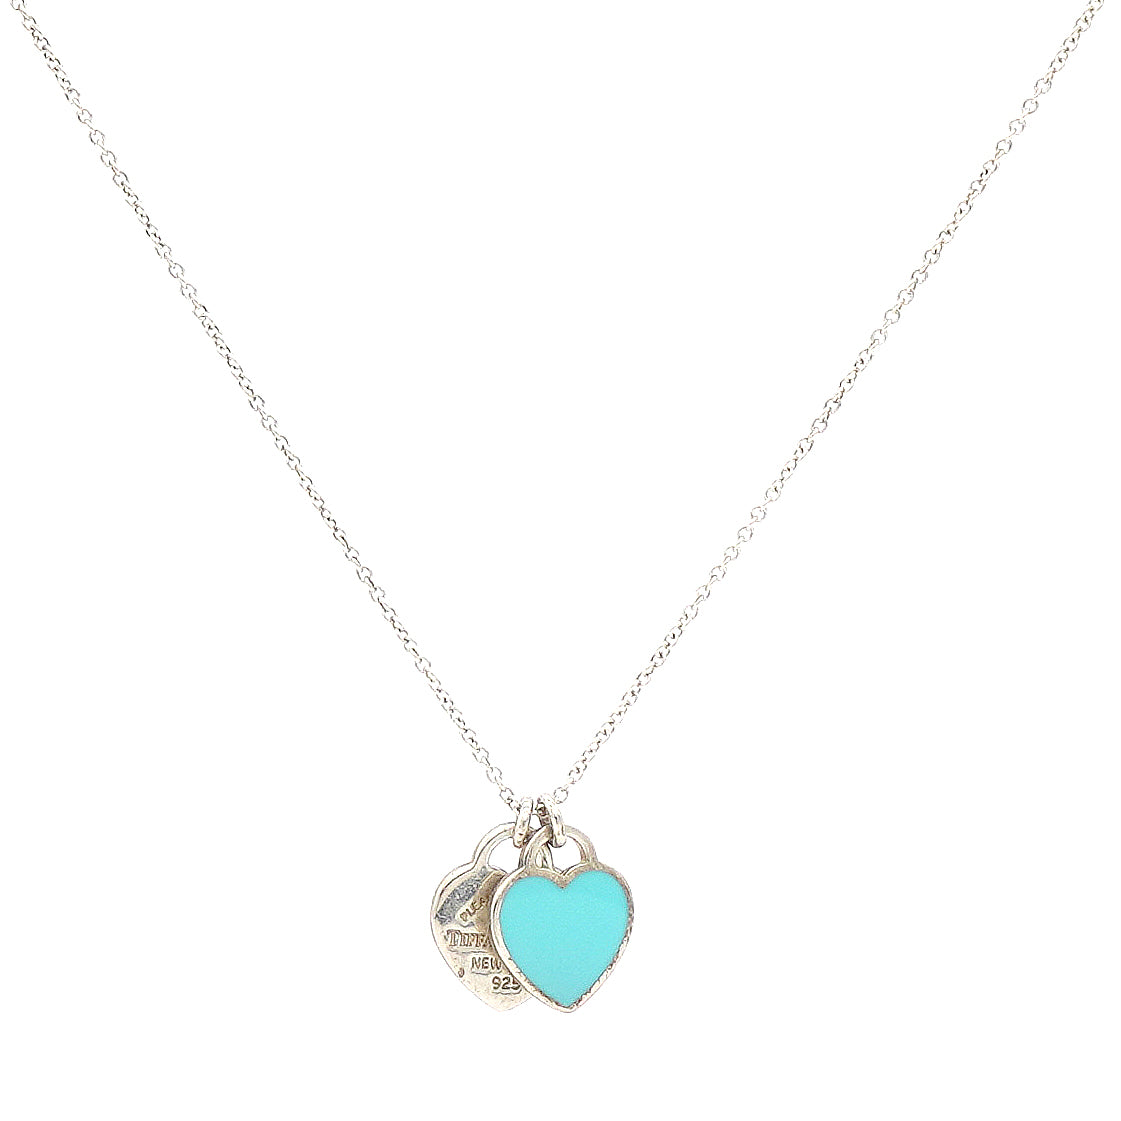 Tiffany & Co. Sterling Silver Heart Tag Choker Necklace – I MISS YOU VINTAGE